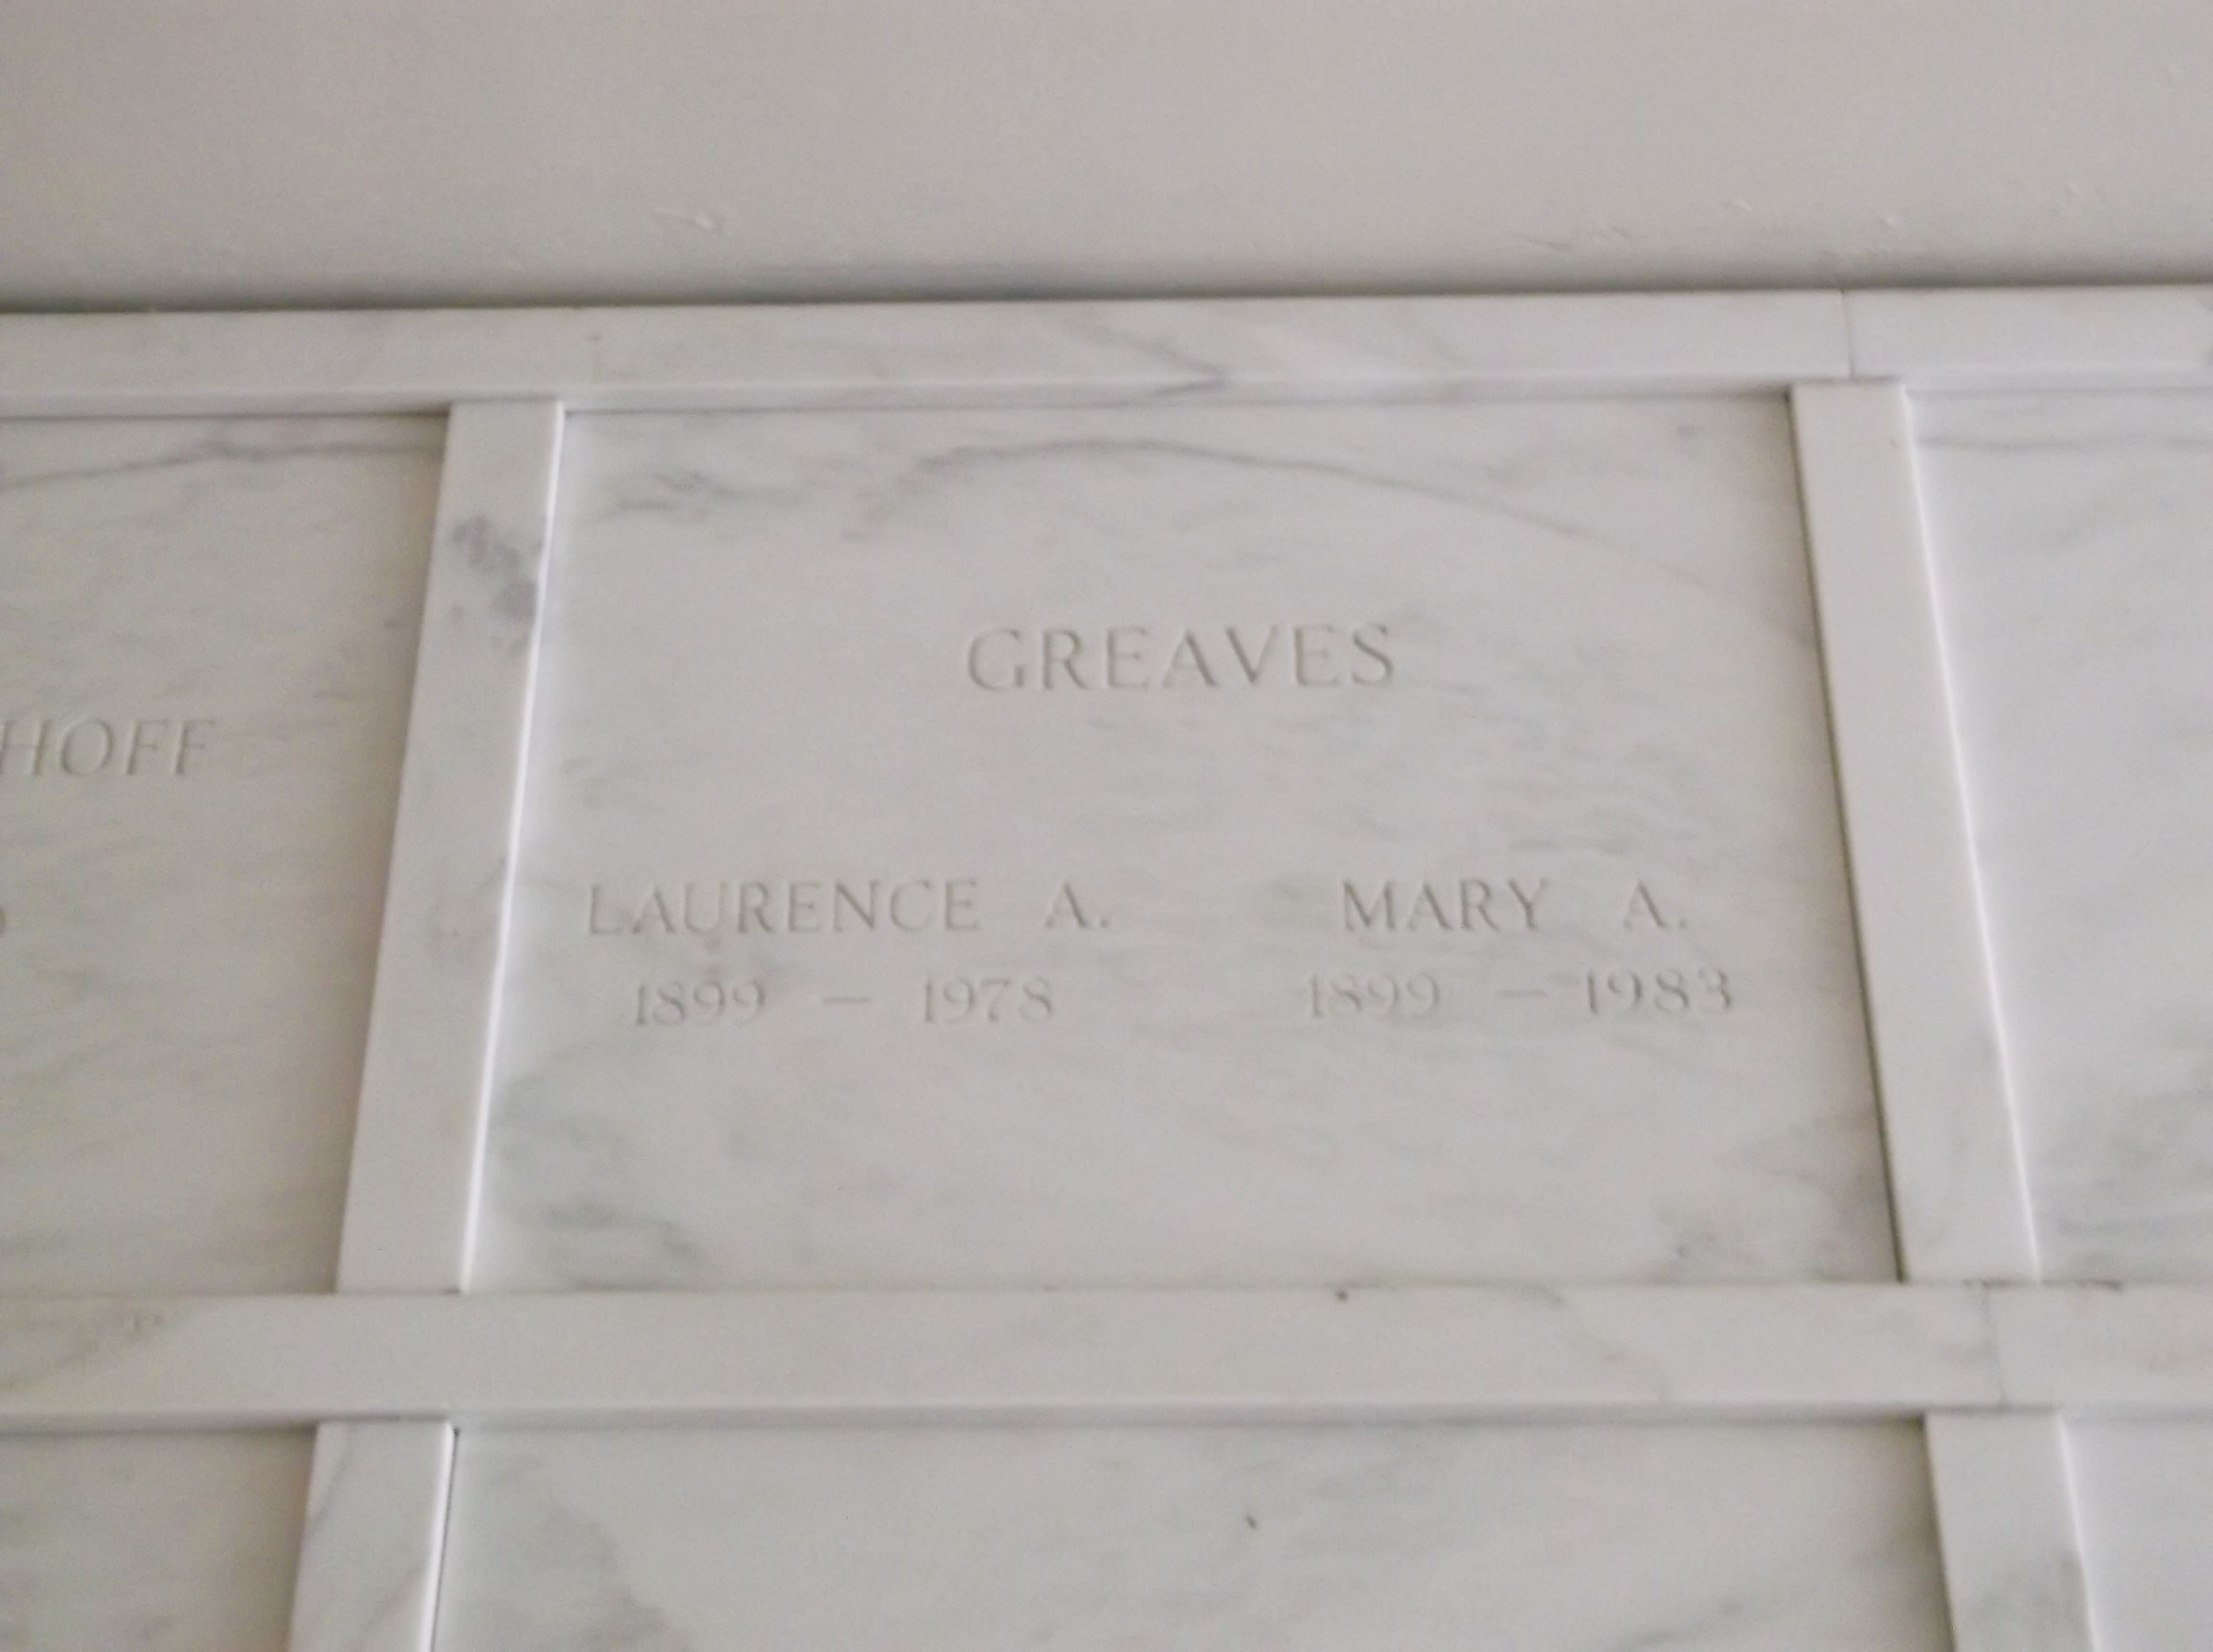 Mary A Greaves